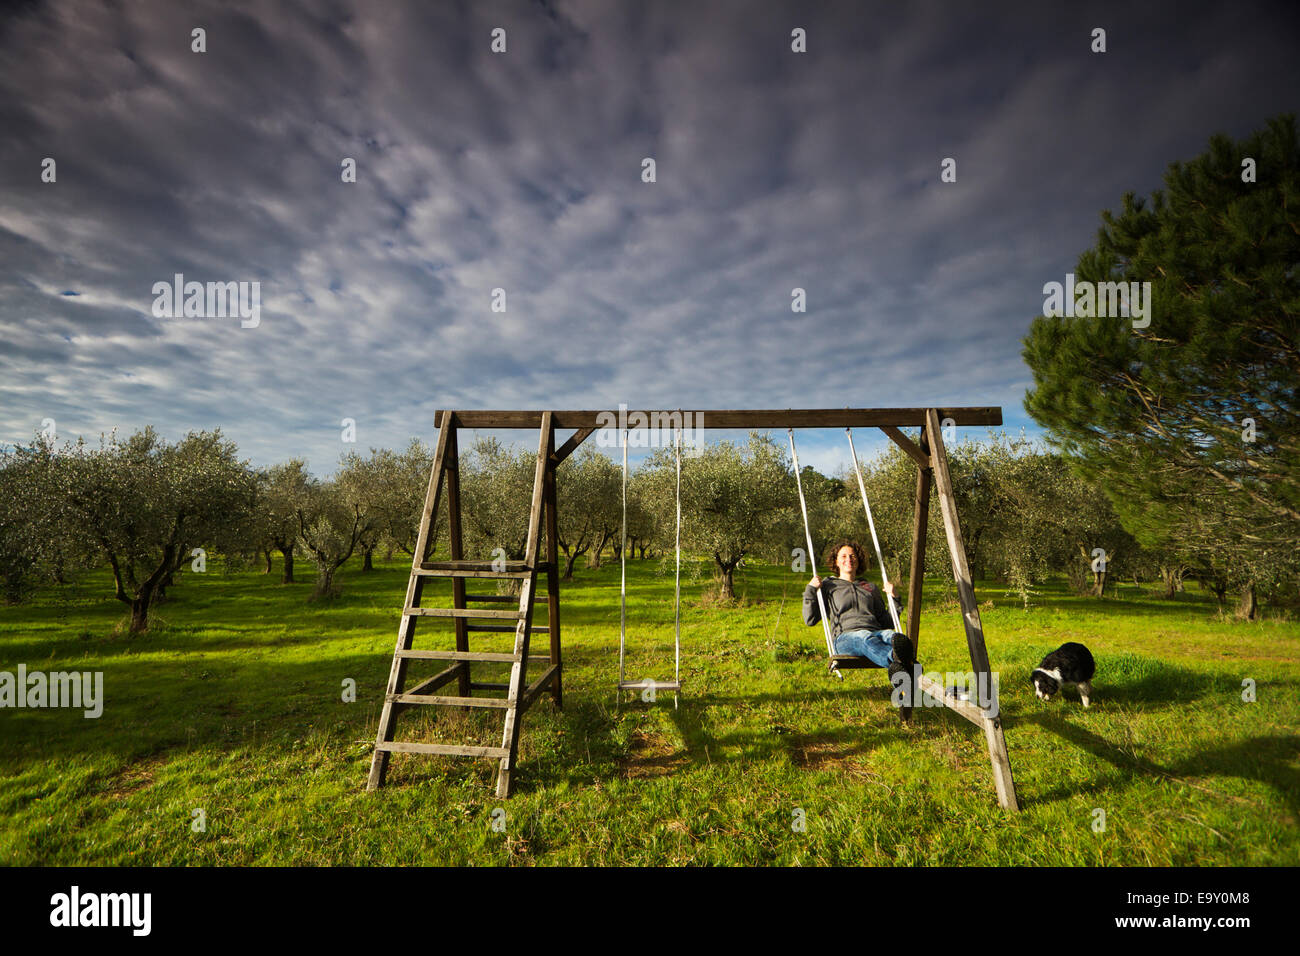 Girl swinging on a wooden swing in front of an olive grove, Tuscany, Italy Stock Photo